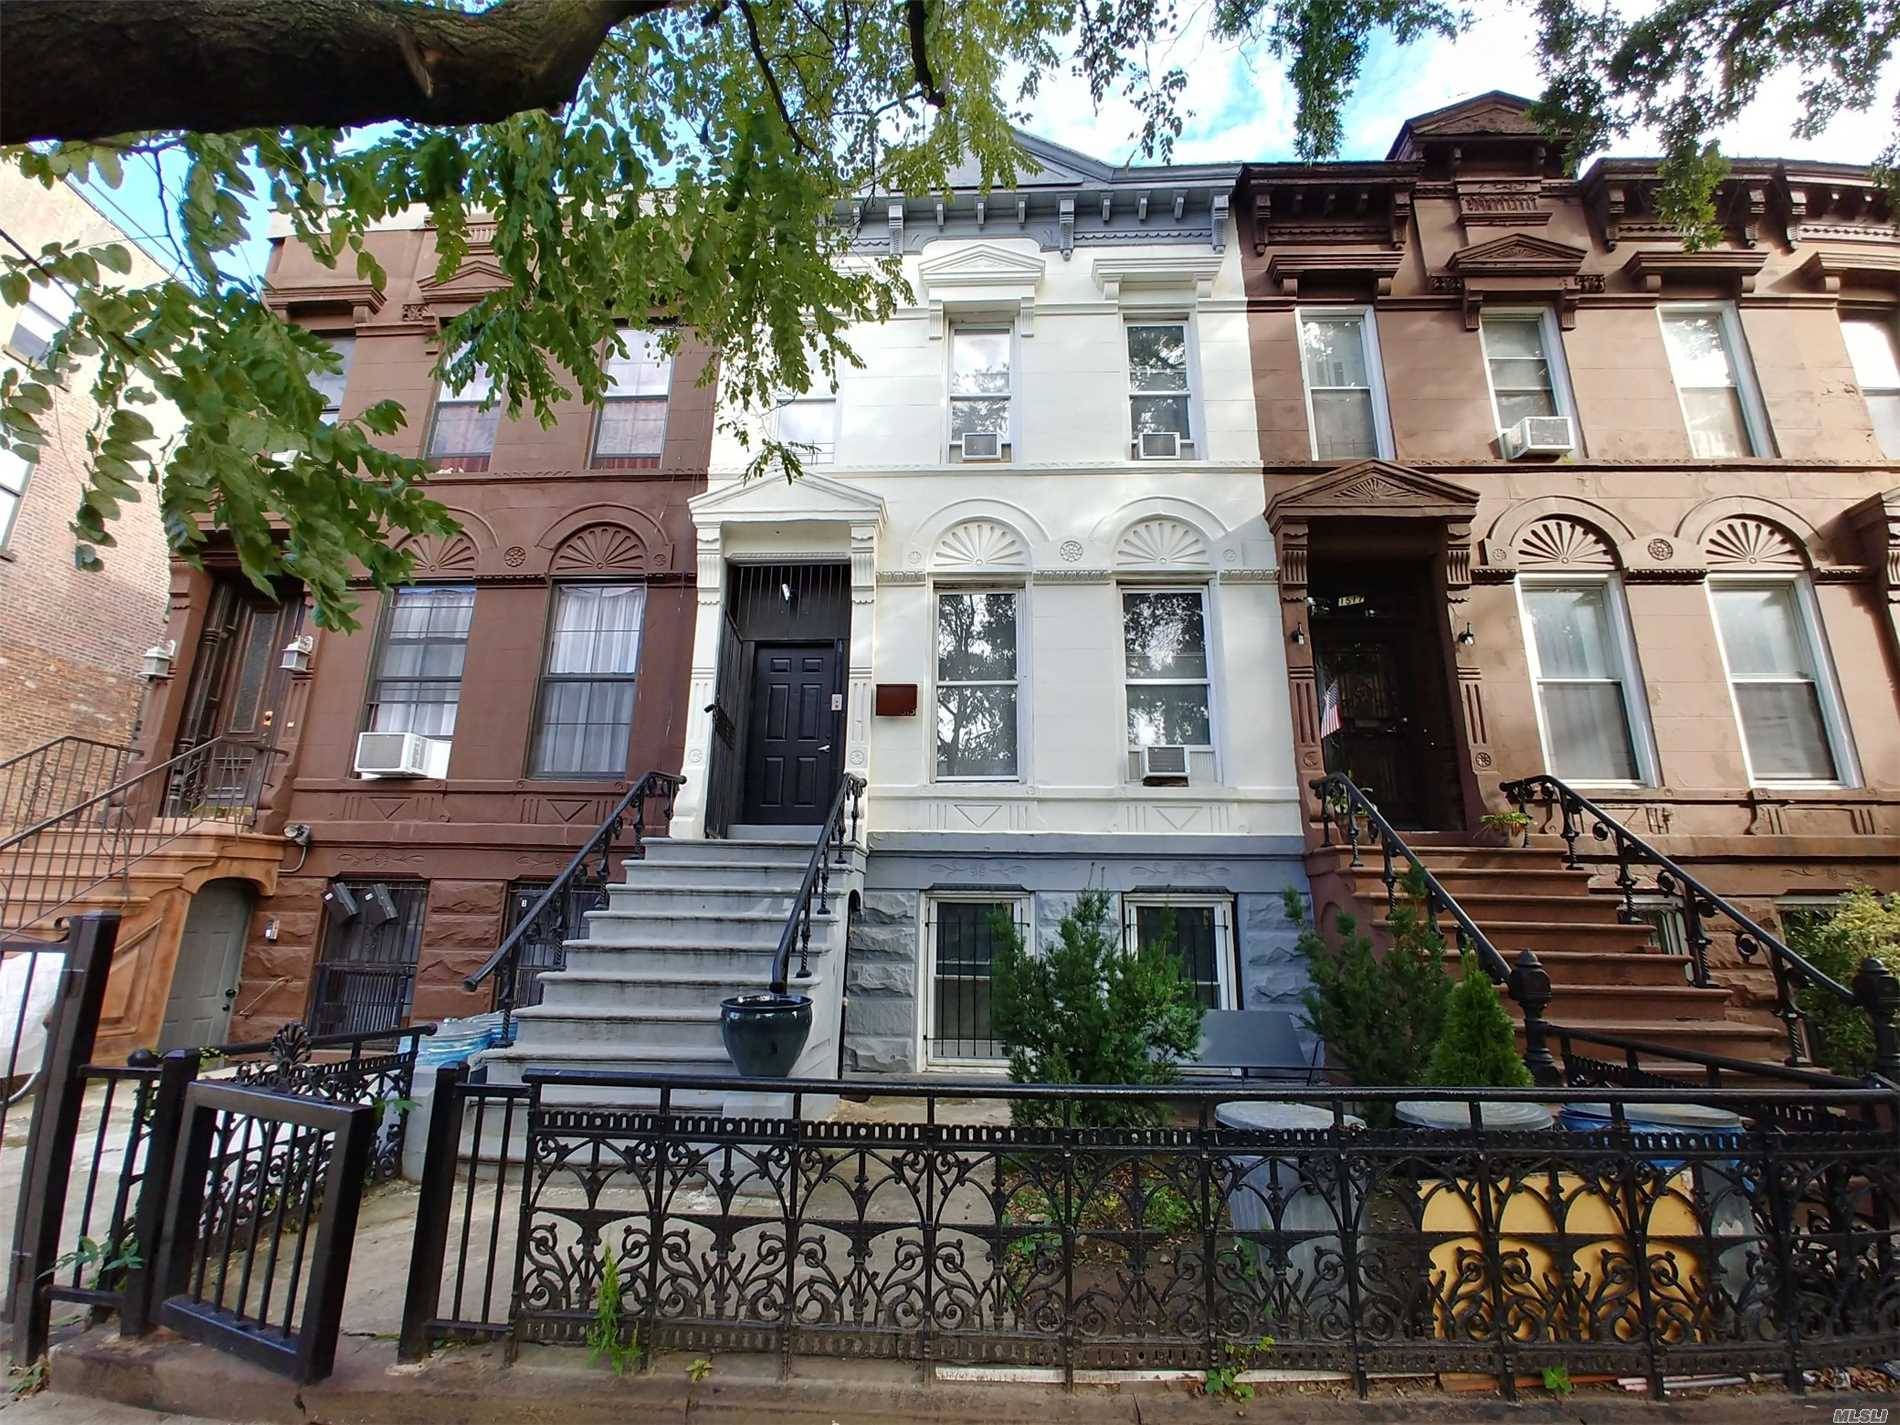 Renovated & Well Maintained 2 Family Brownstone In The Historical District Of Crown Heights.